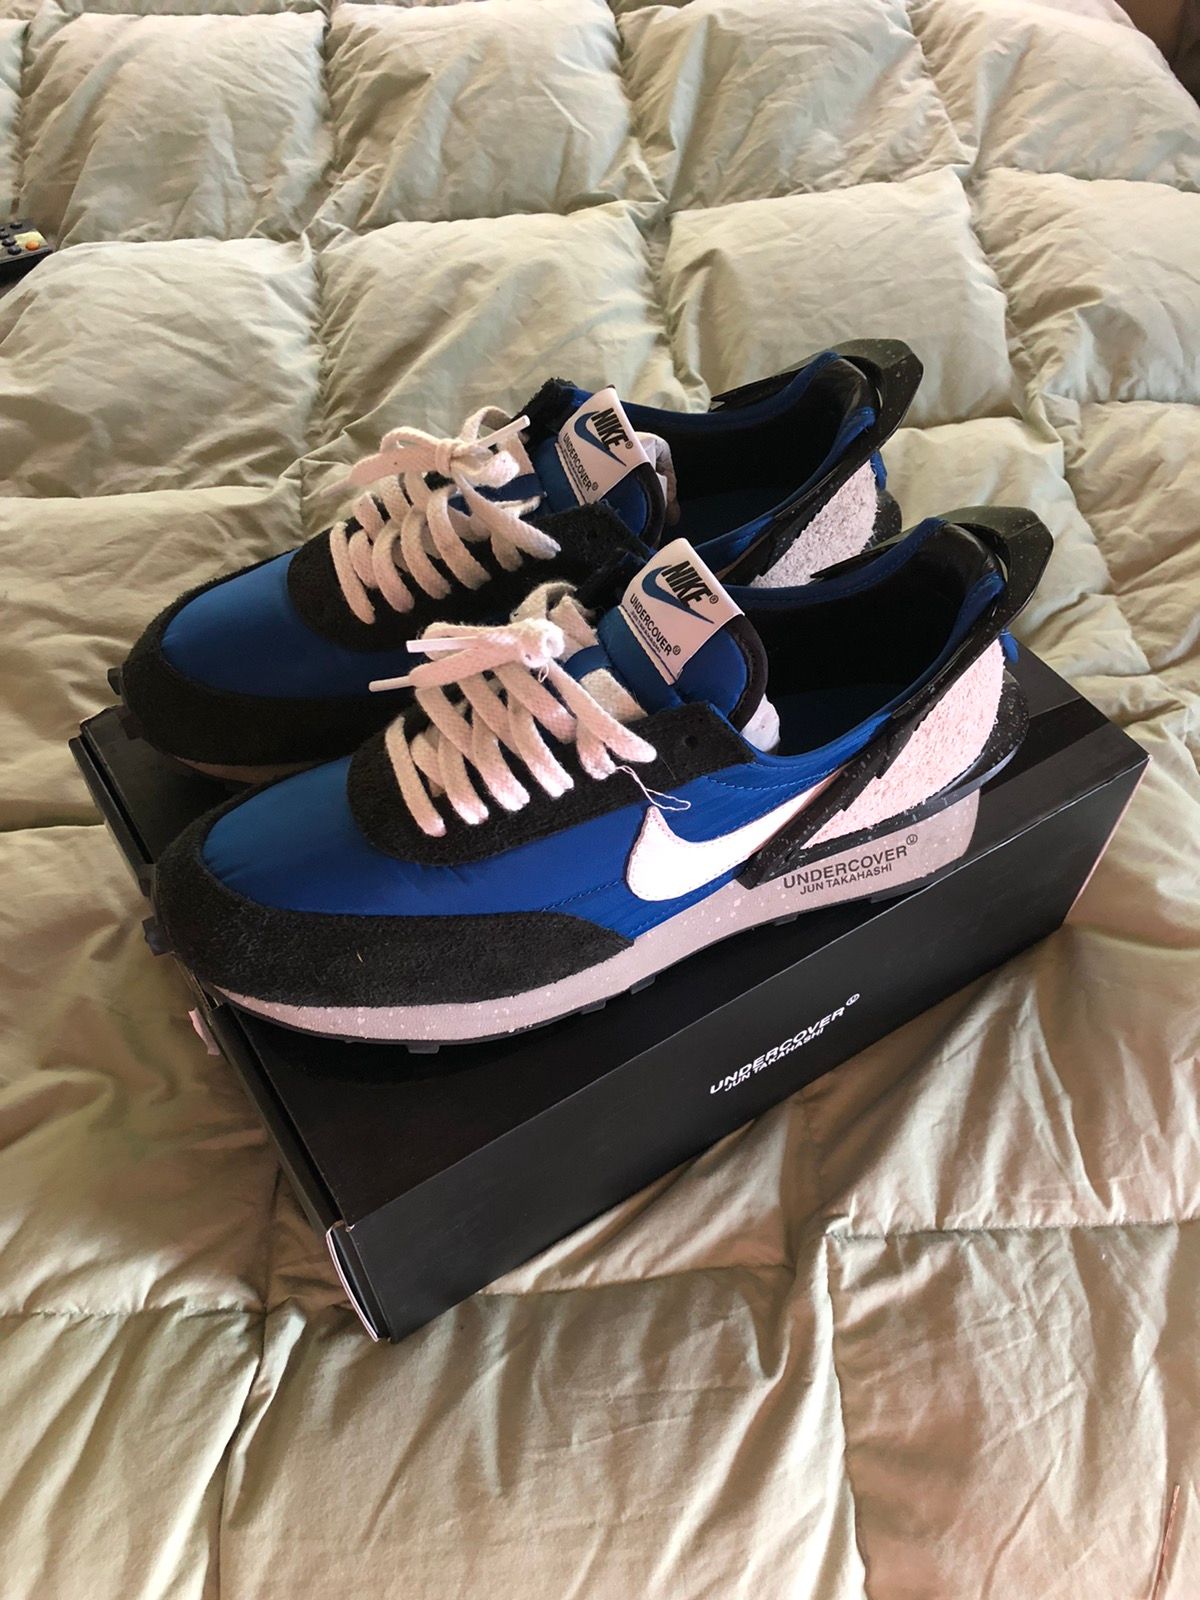 Pre-owned Nike Daybreak Blue Jay 2019 Shoes